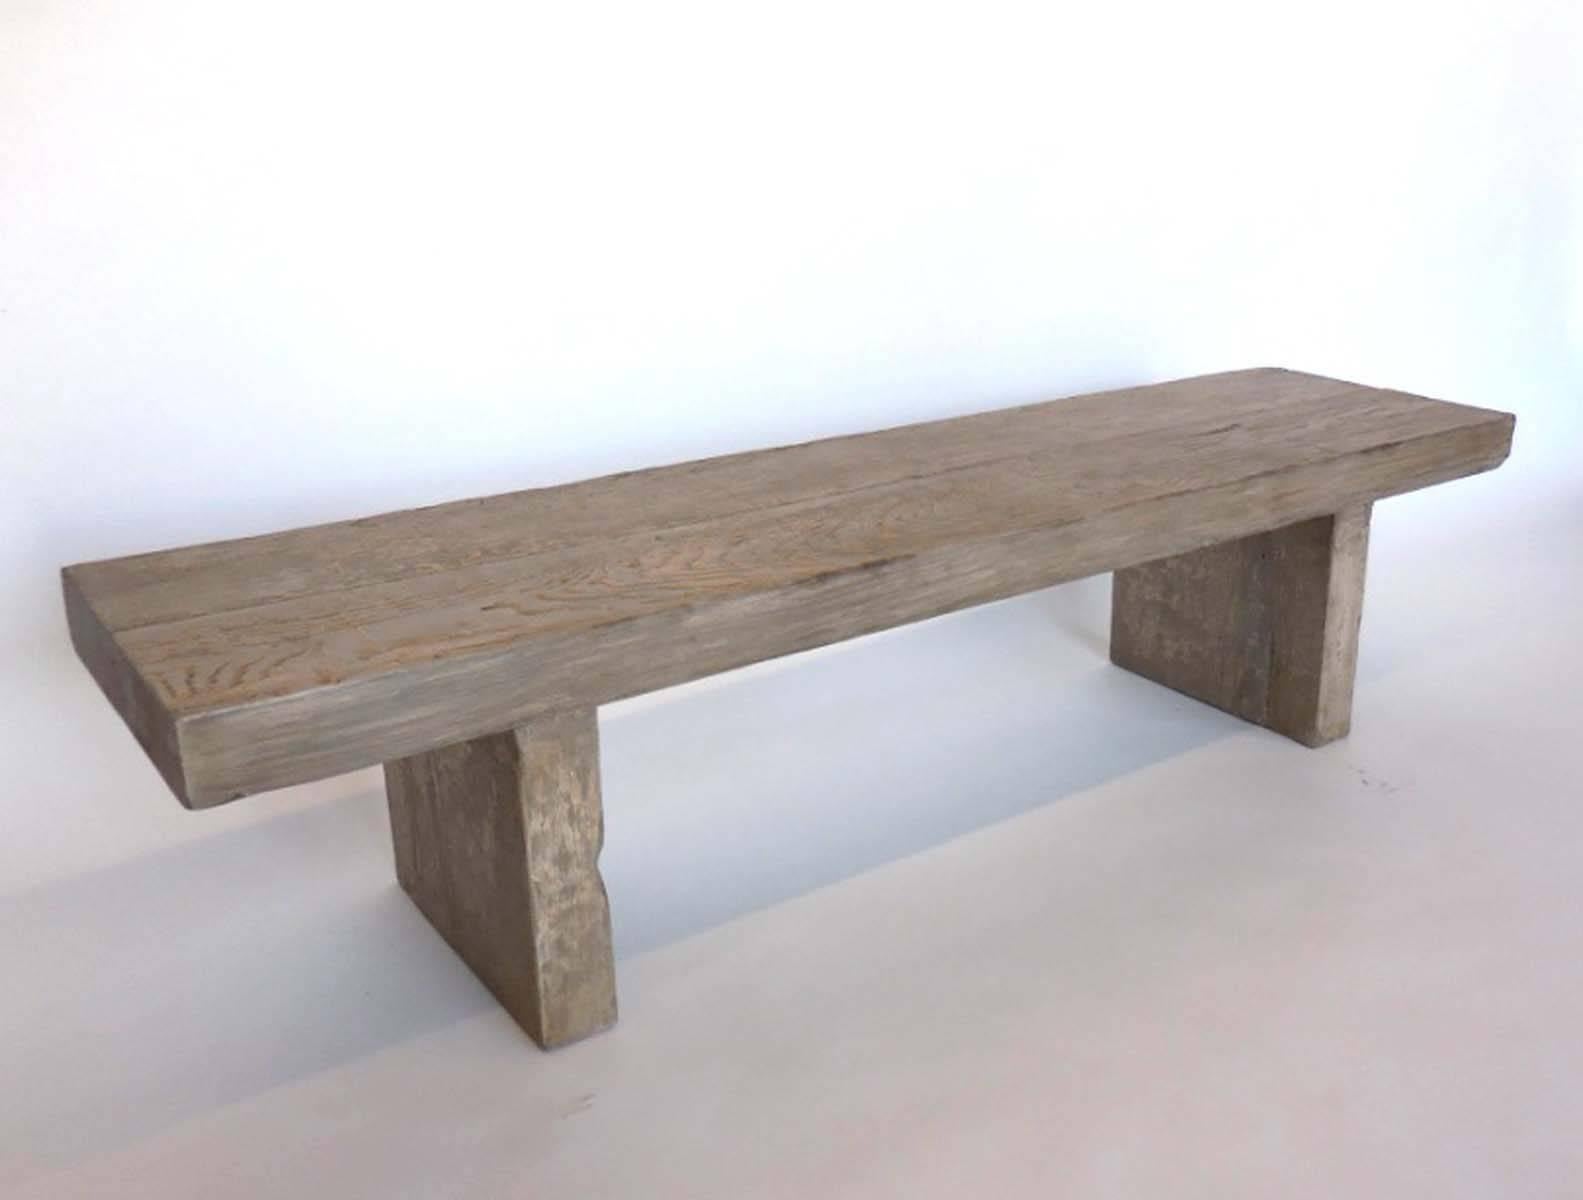 Custom bench in 100 year old 3 inch thick Douglas fir. Applied finish in dove grey. This bench is customizable in dimensions and finish. 